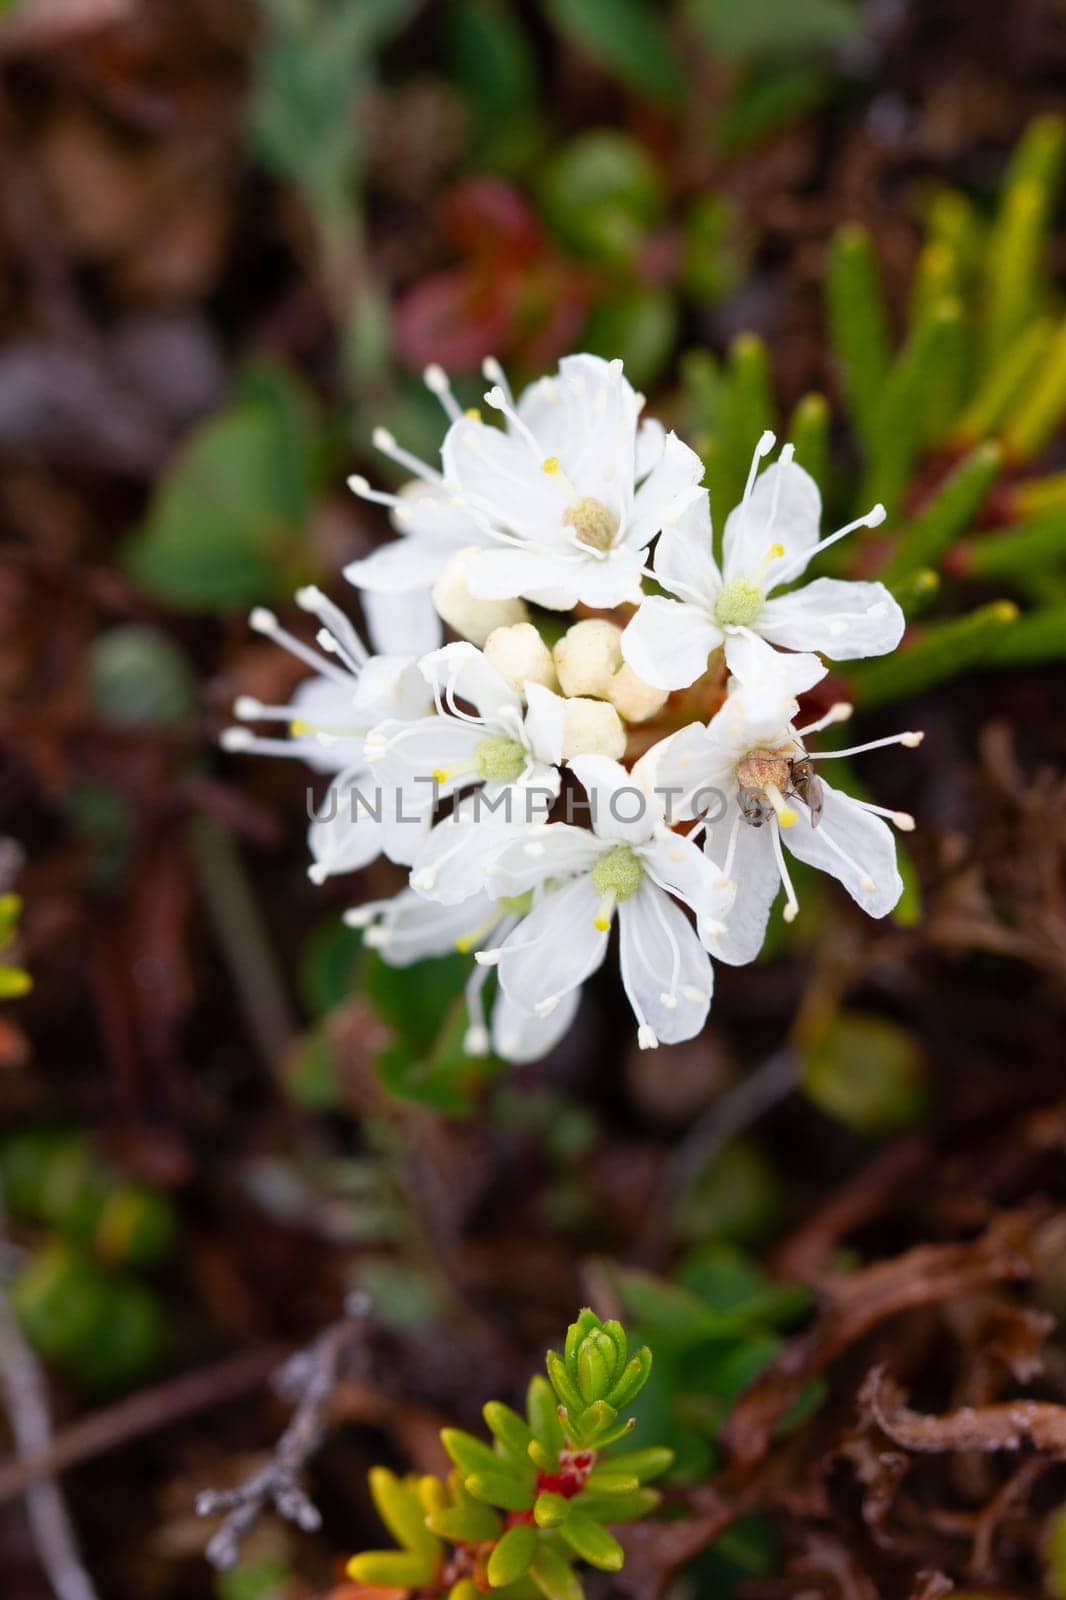 Close-up of Labrador tea flower found in Canada's arctic tundra by Granchinho